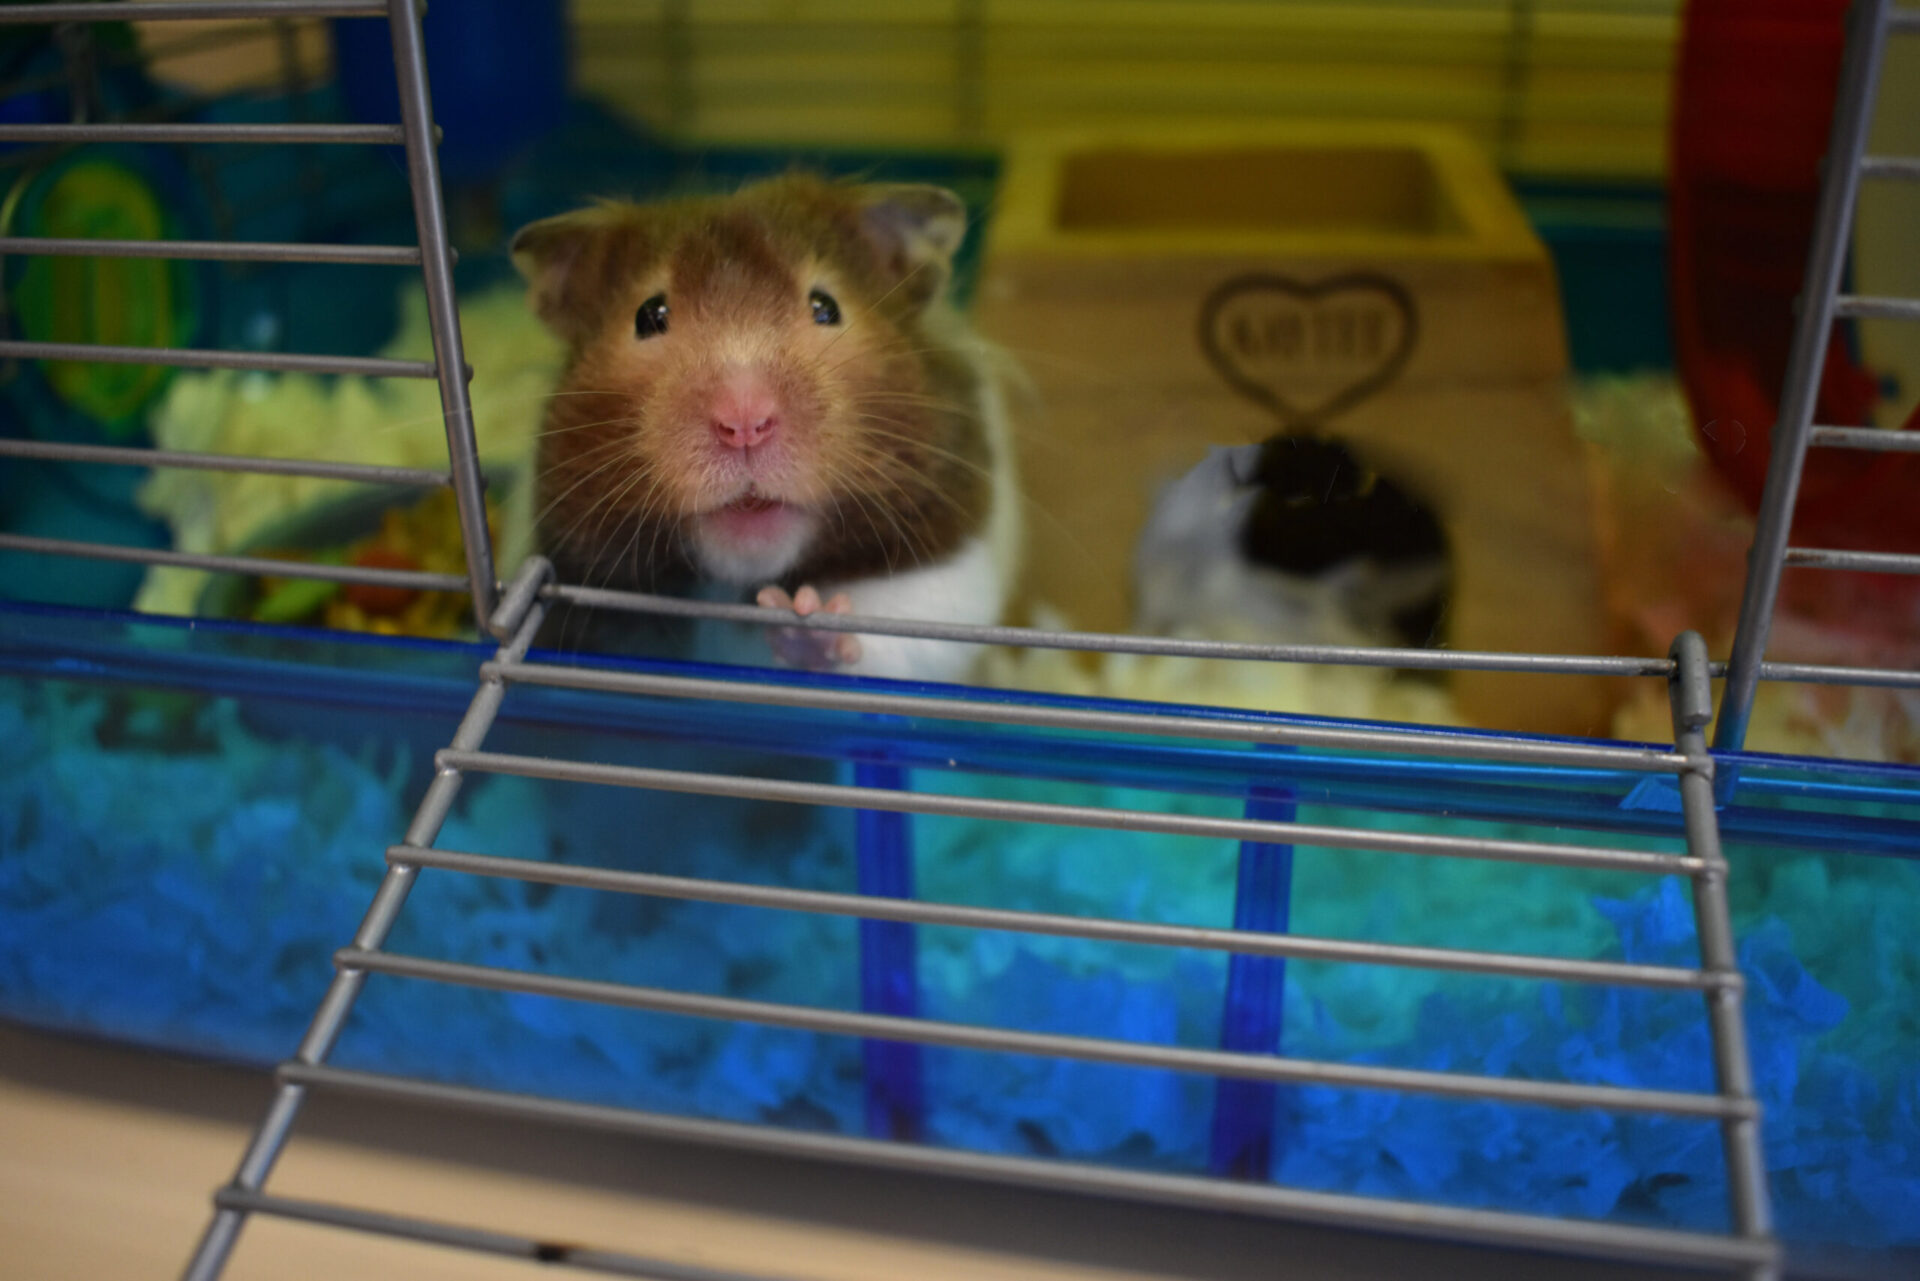 Syrian Hamster Lifespan: How Long Do They Live?